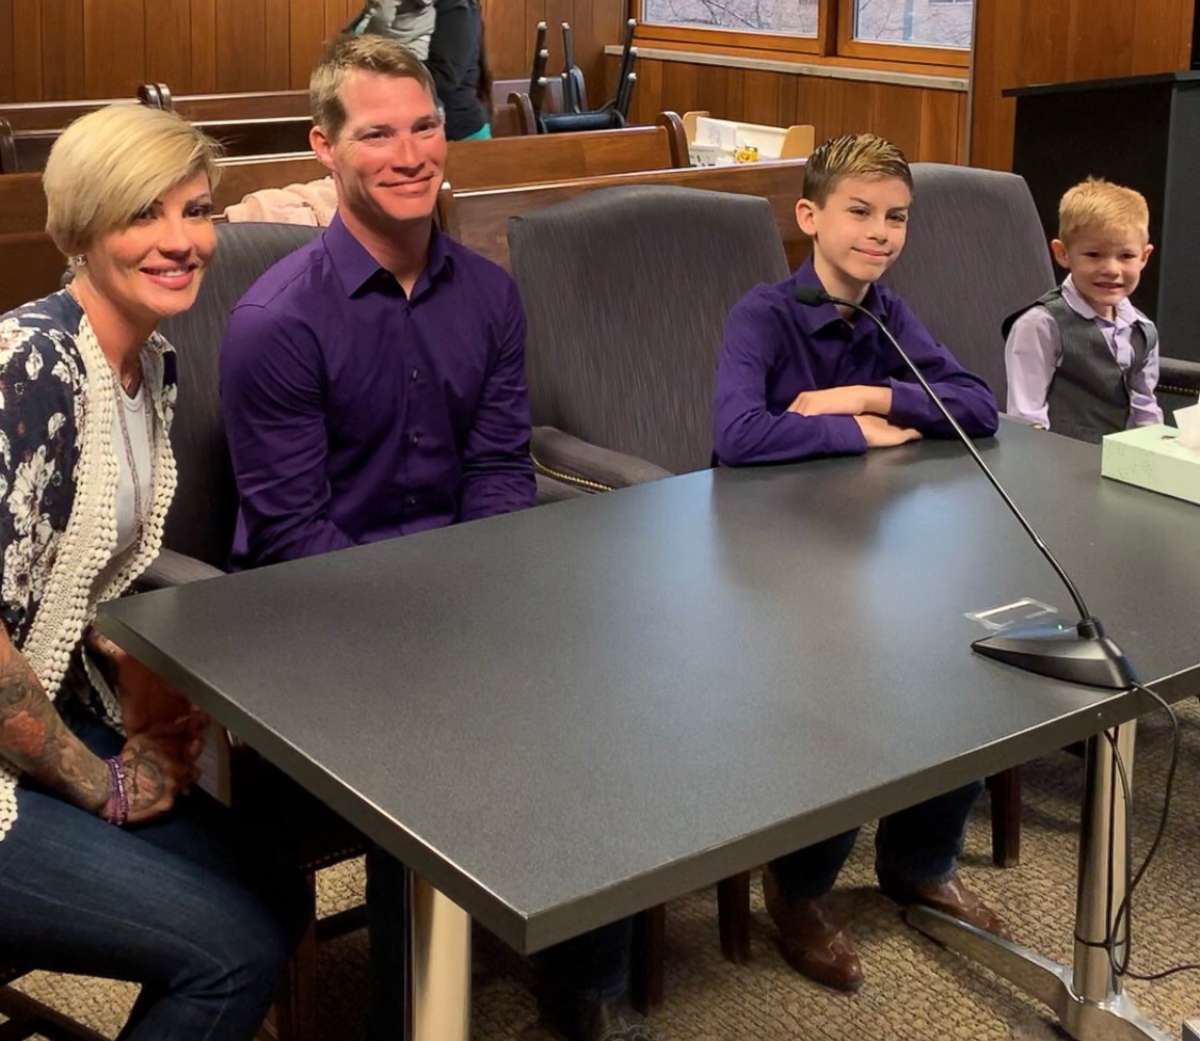 PHOTO: Gabe Banzhof, 10, is seen at a Monroe Country courthouse in Michigan, with his mother, Jessica Banzhof, 10, brother Eli Banzhof, 5 and father Thomas Banzhof, on April 17, 2019, on the day Gabe was adopted by his dad.